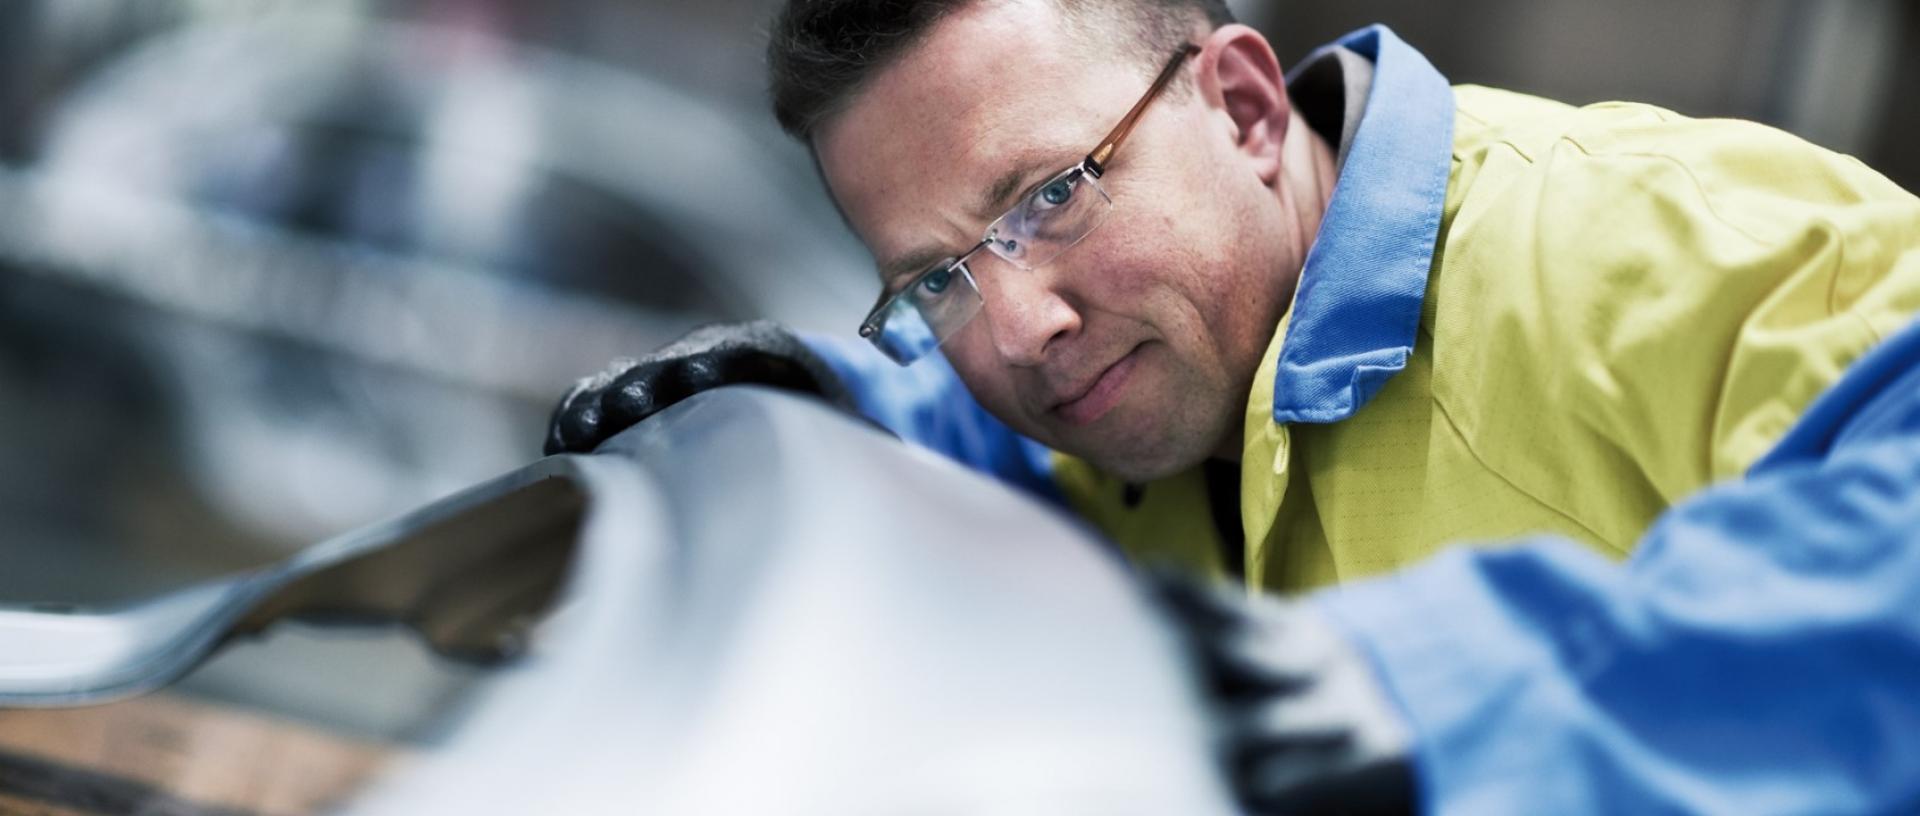 Tata Steel employee studying a piece of metal with a pensive look